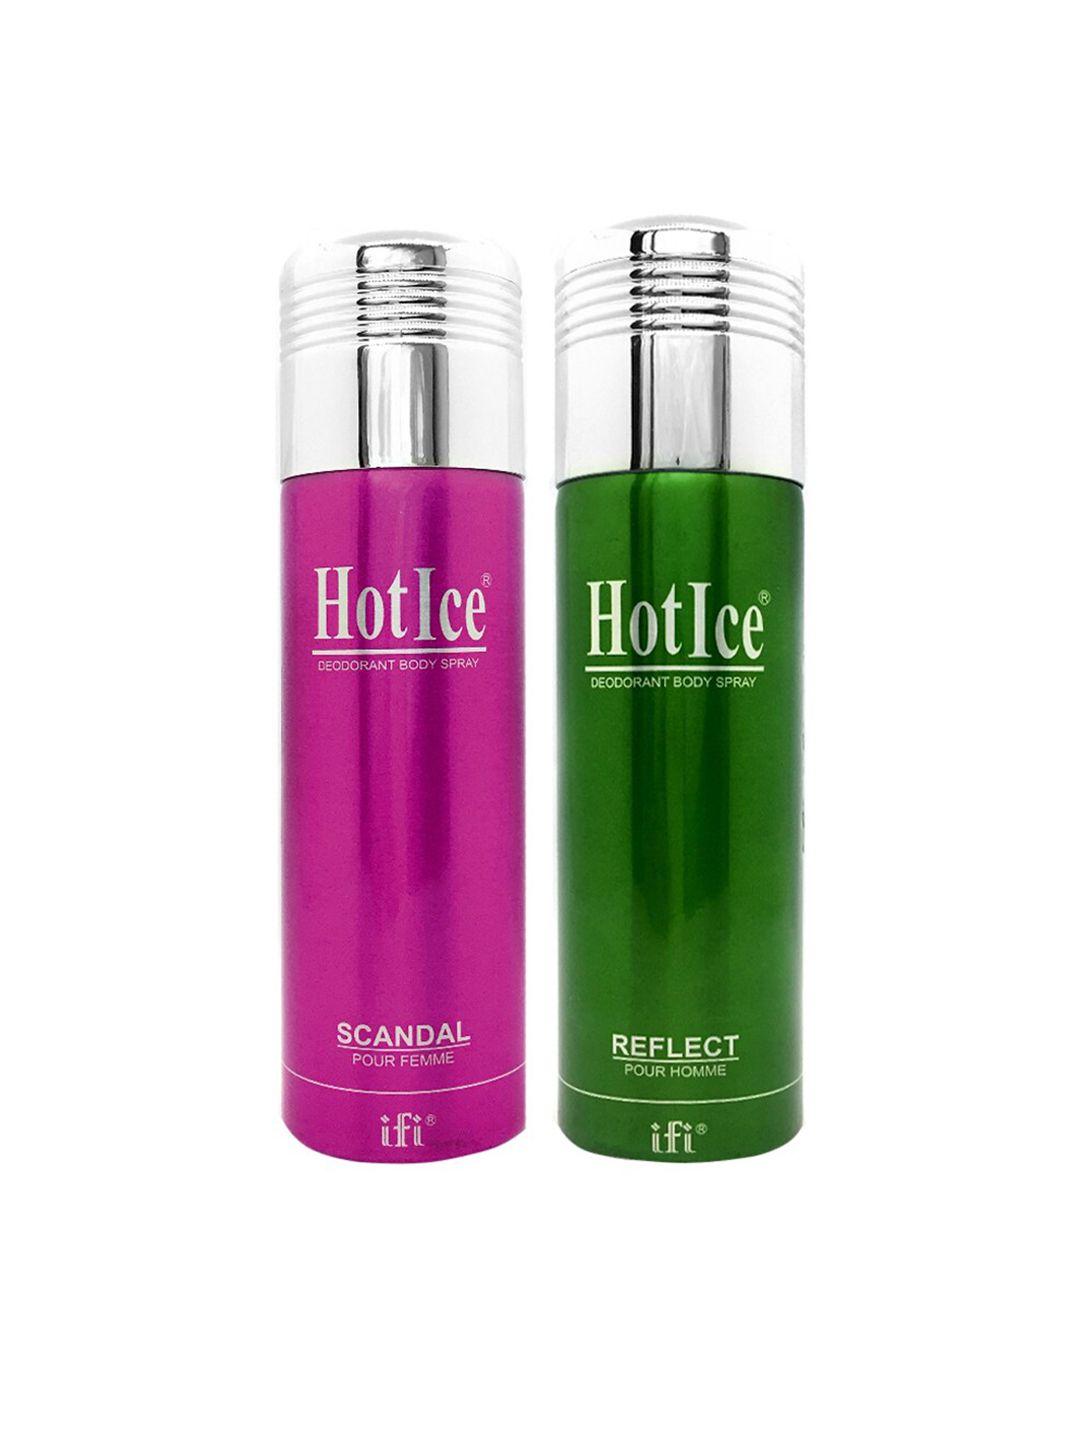 hot ice scandal fomme & reflect homme deodorant - 200ml each